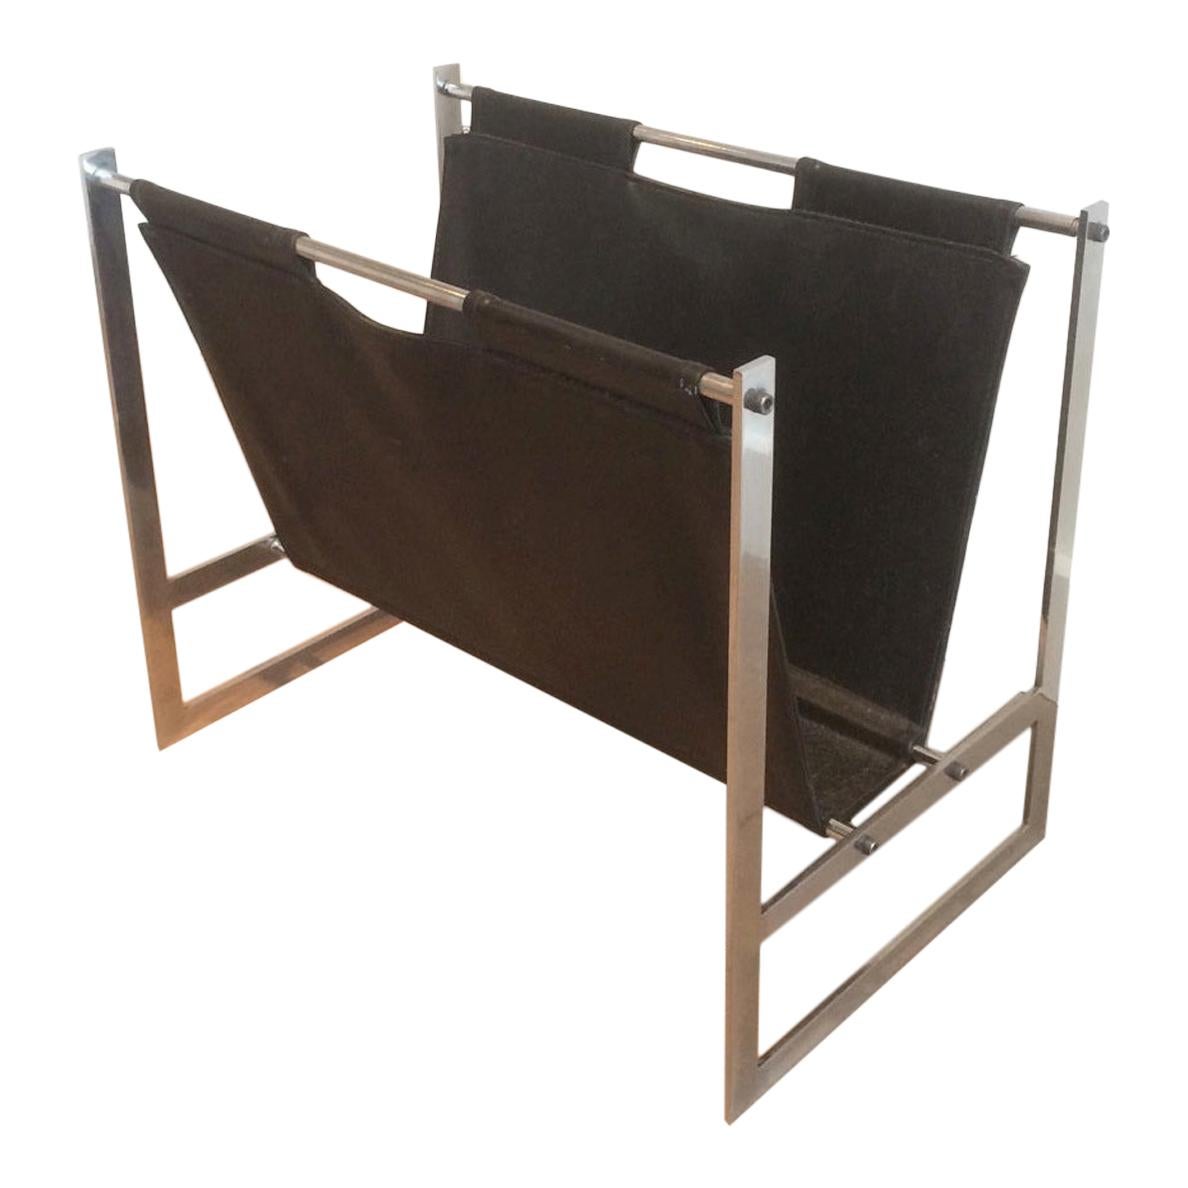 In the Style of Poul Kjaerholm, Brushed Steel and Black Leather Magazine Rack